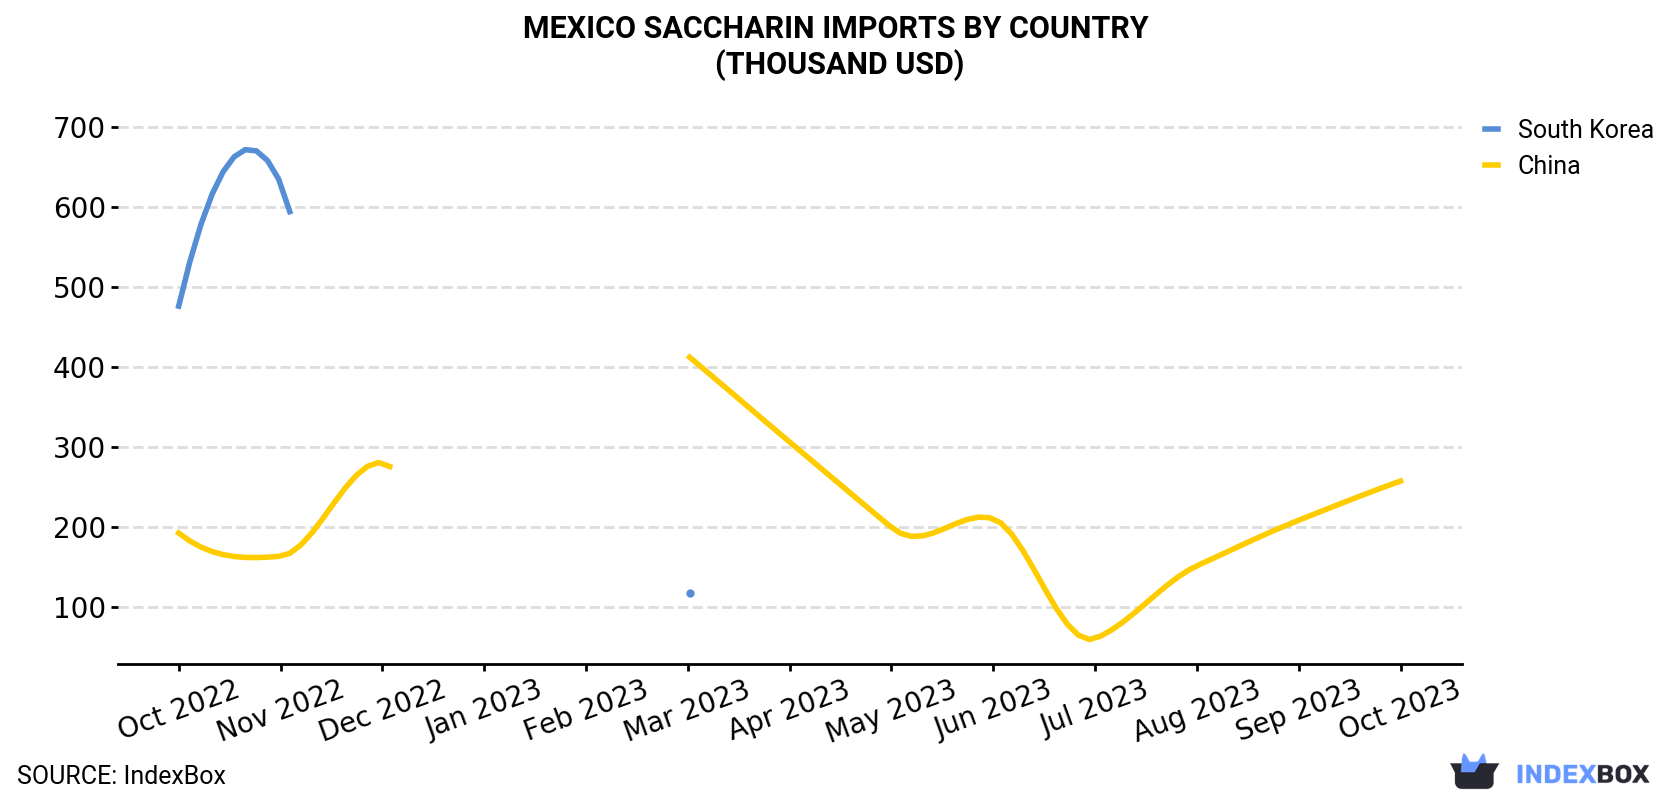 Mexico Saccharin Imports By Country (Thousand USD)